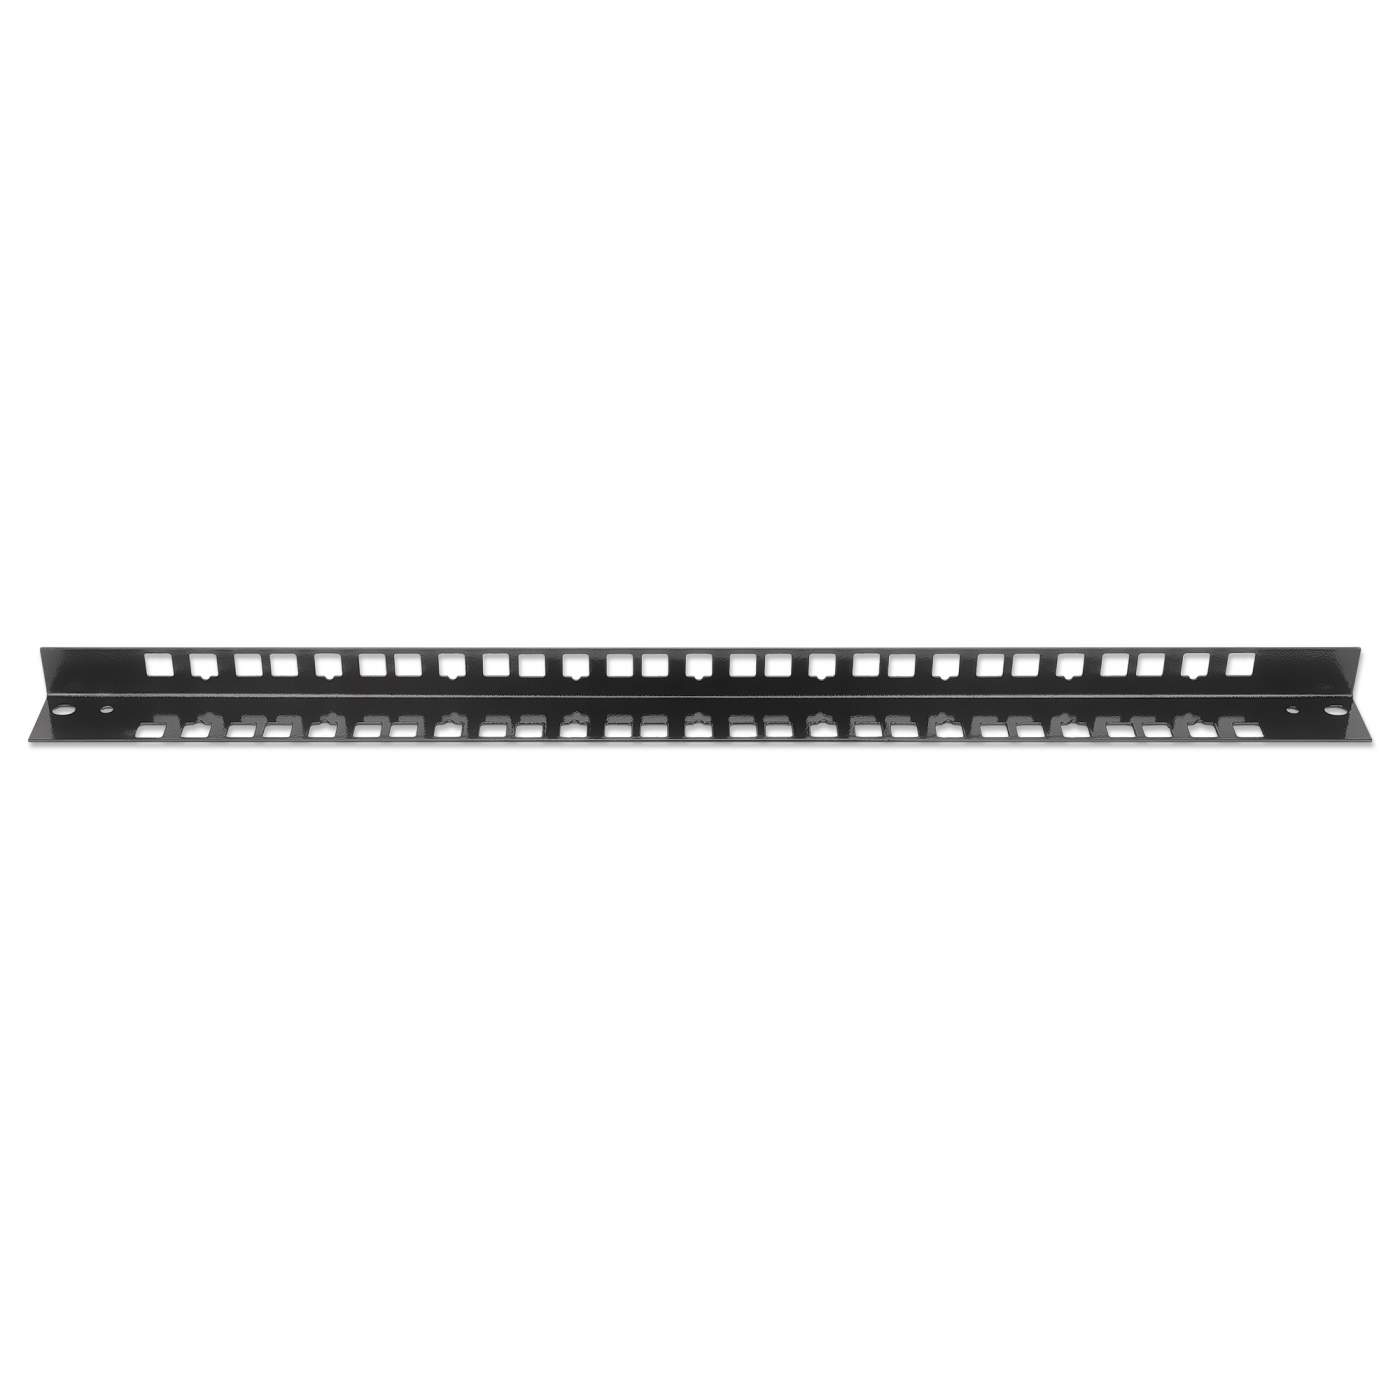 Spare Rails for 19" Wallmount Cabinets, 9U Image 3